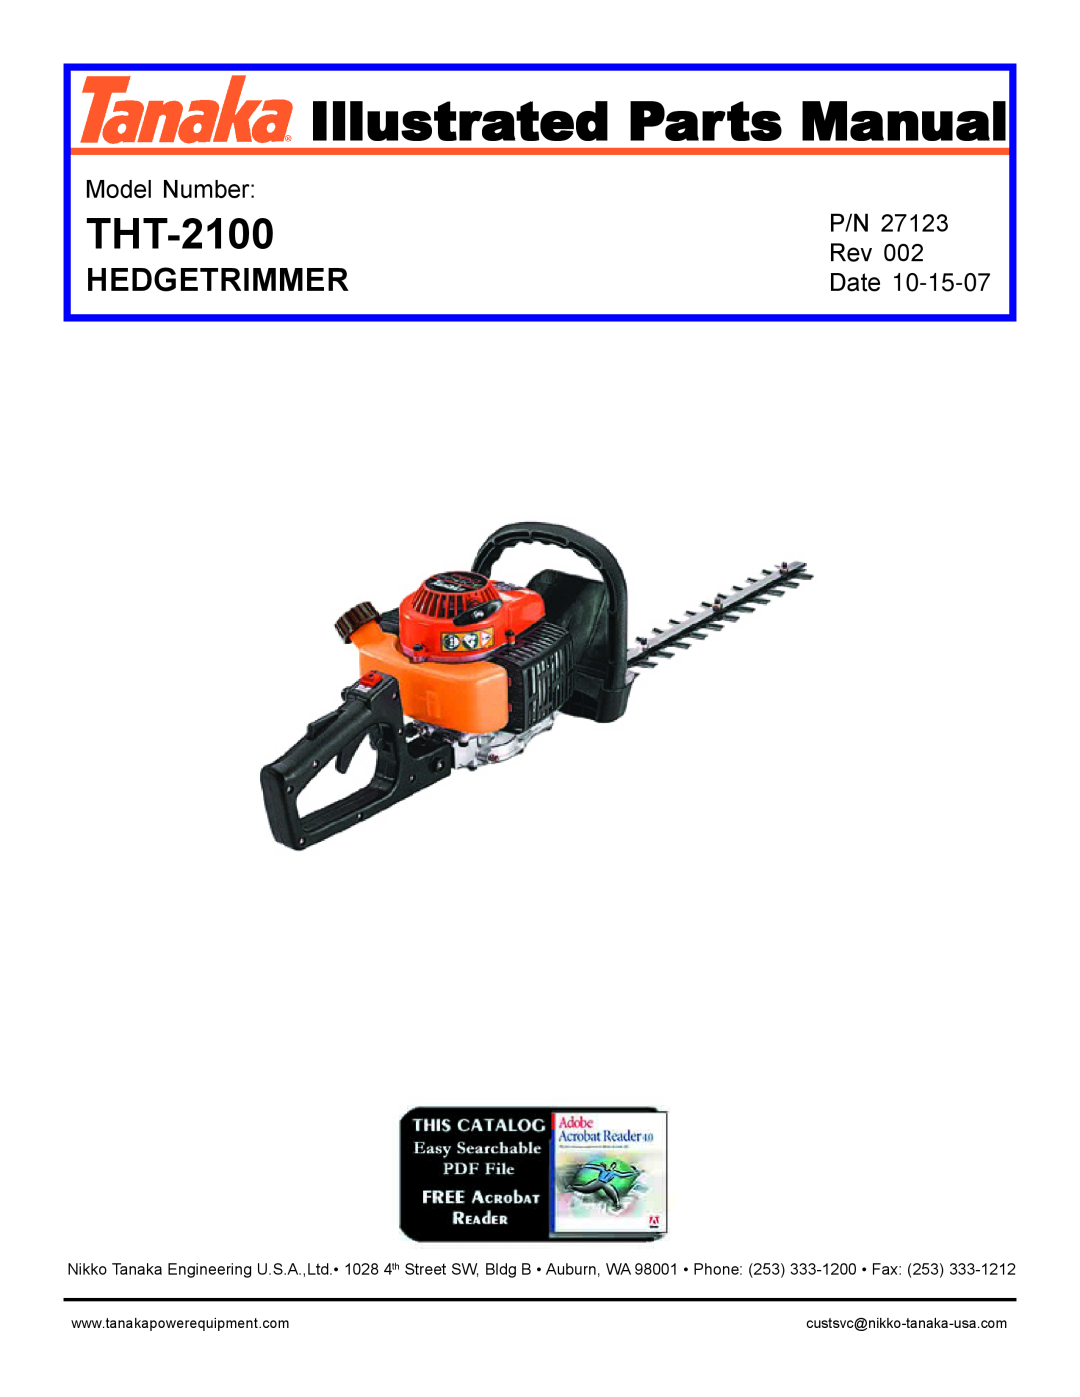 Tanaka manual THT-2100, Hedgetrimmer, Illustrated Parts Manual, Model Number, Date 